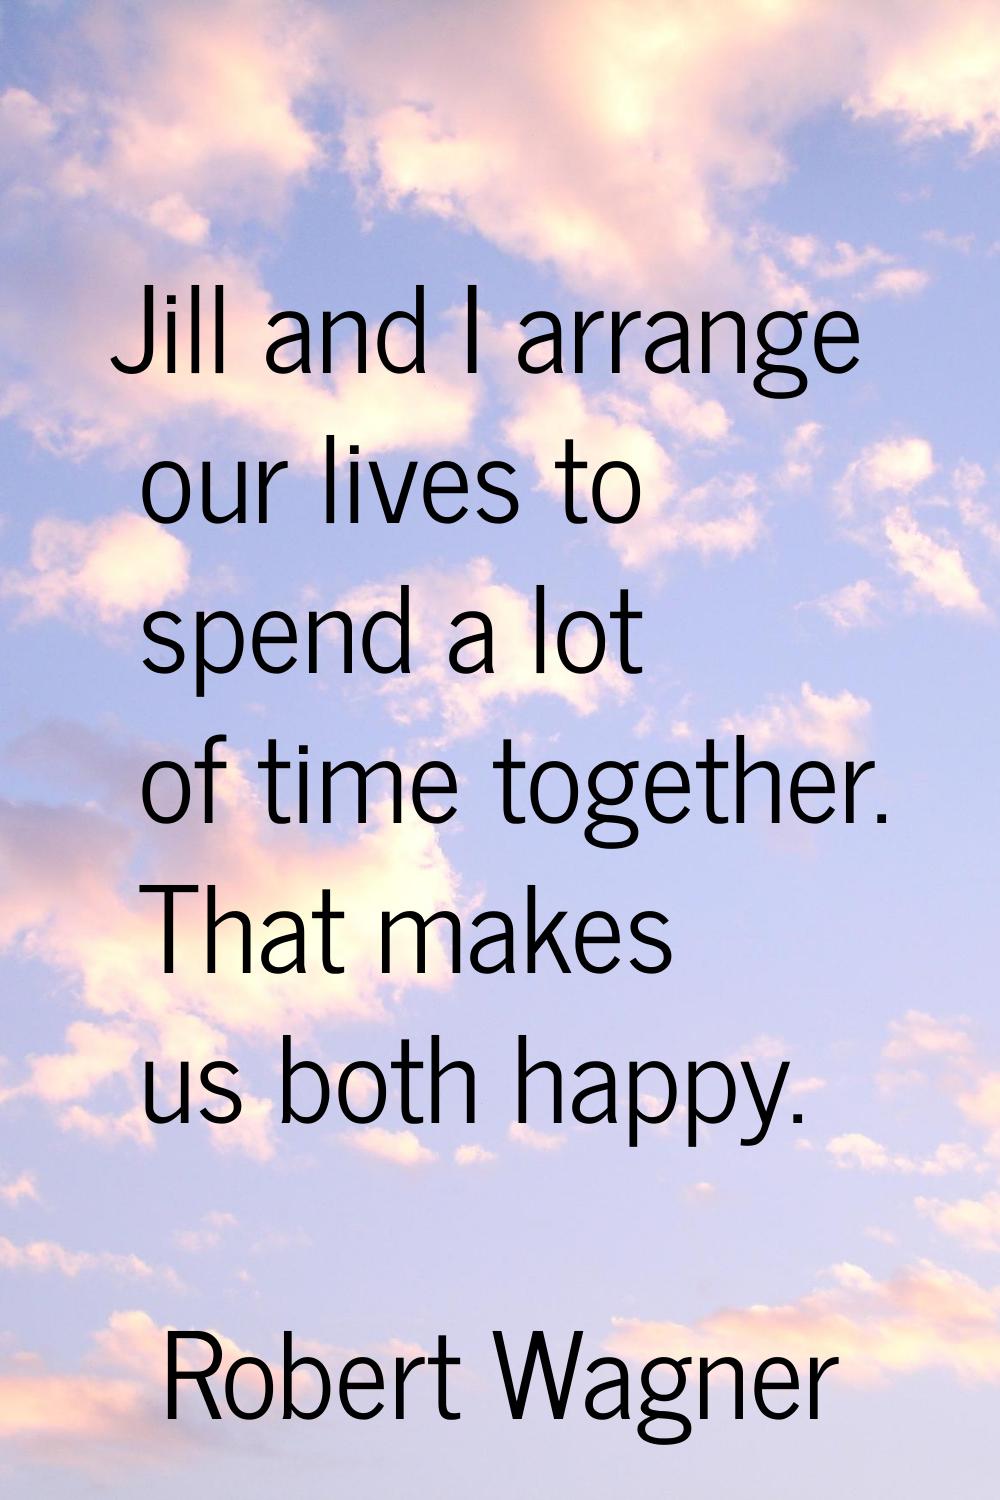 Jill and I arrange our lives to spend a lot of time together. That makes us both happy.